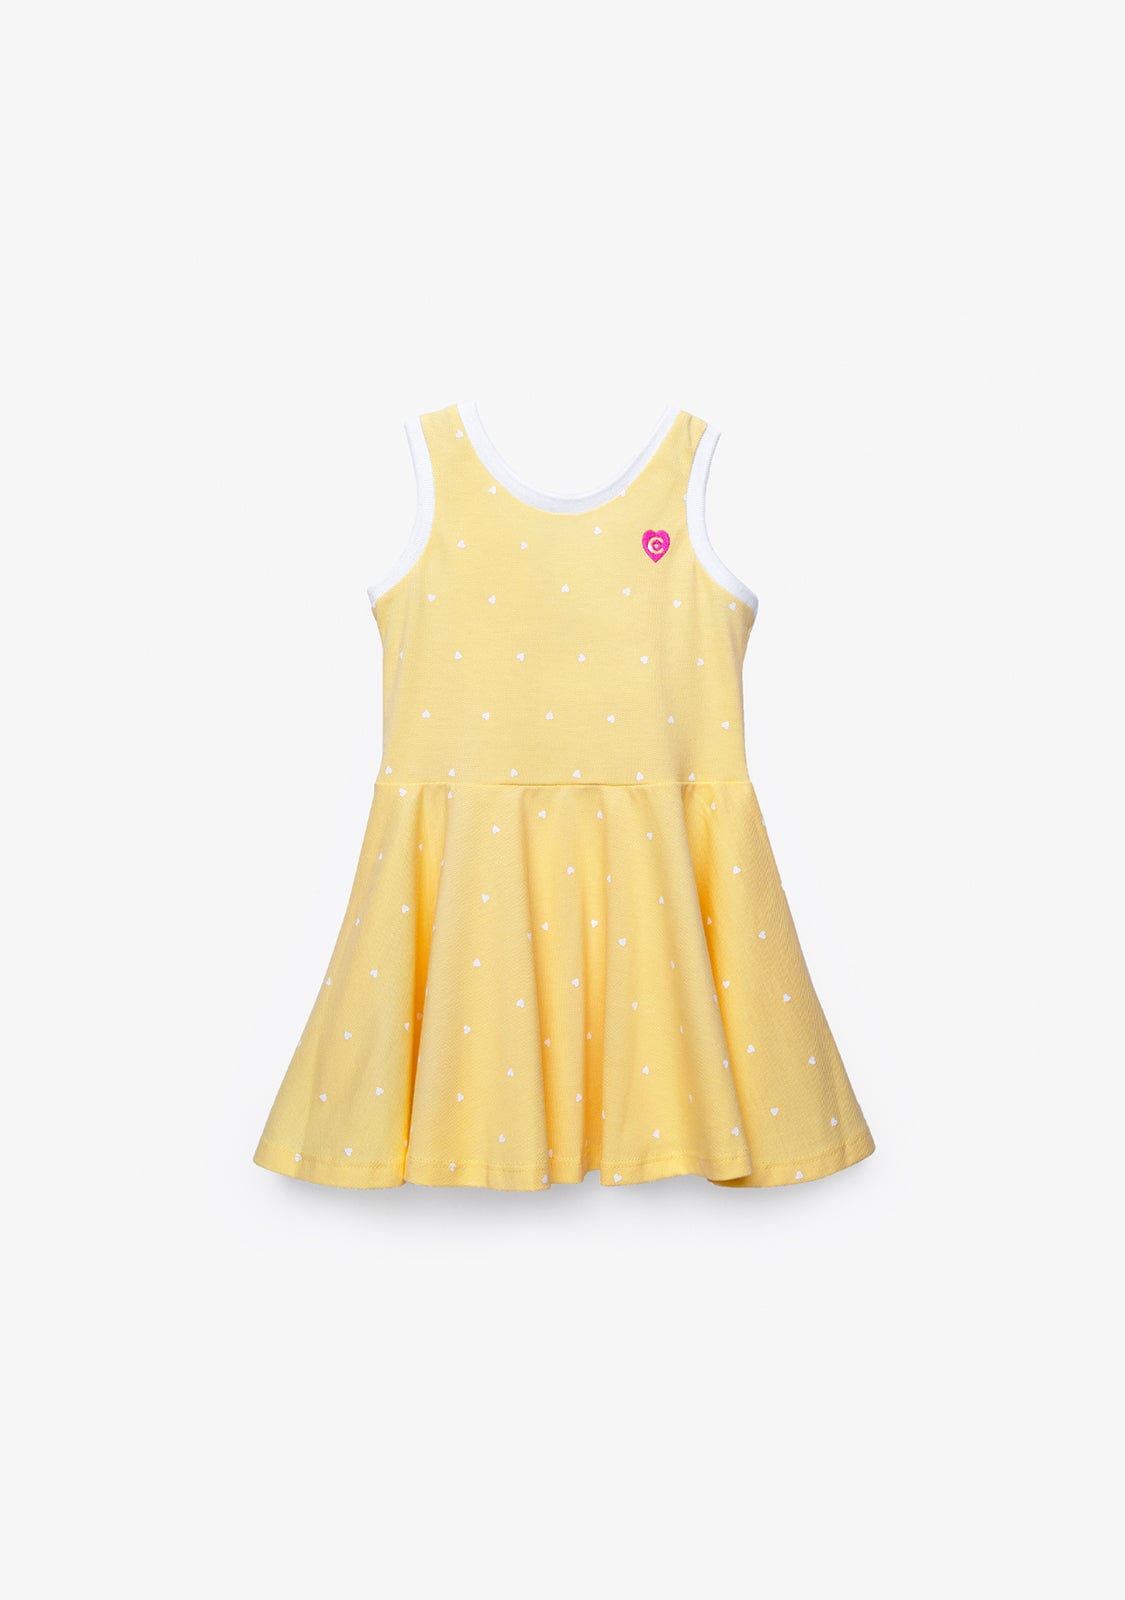 CONGUITOS TEXTIL Clothing Girl's Yellow Hearts Skater Dress